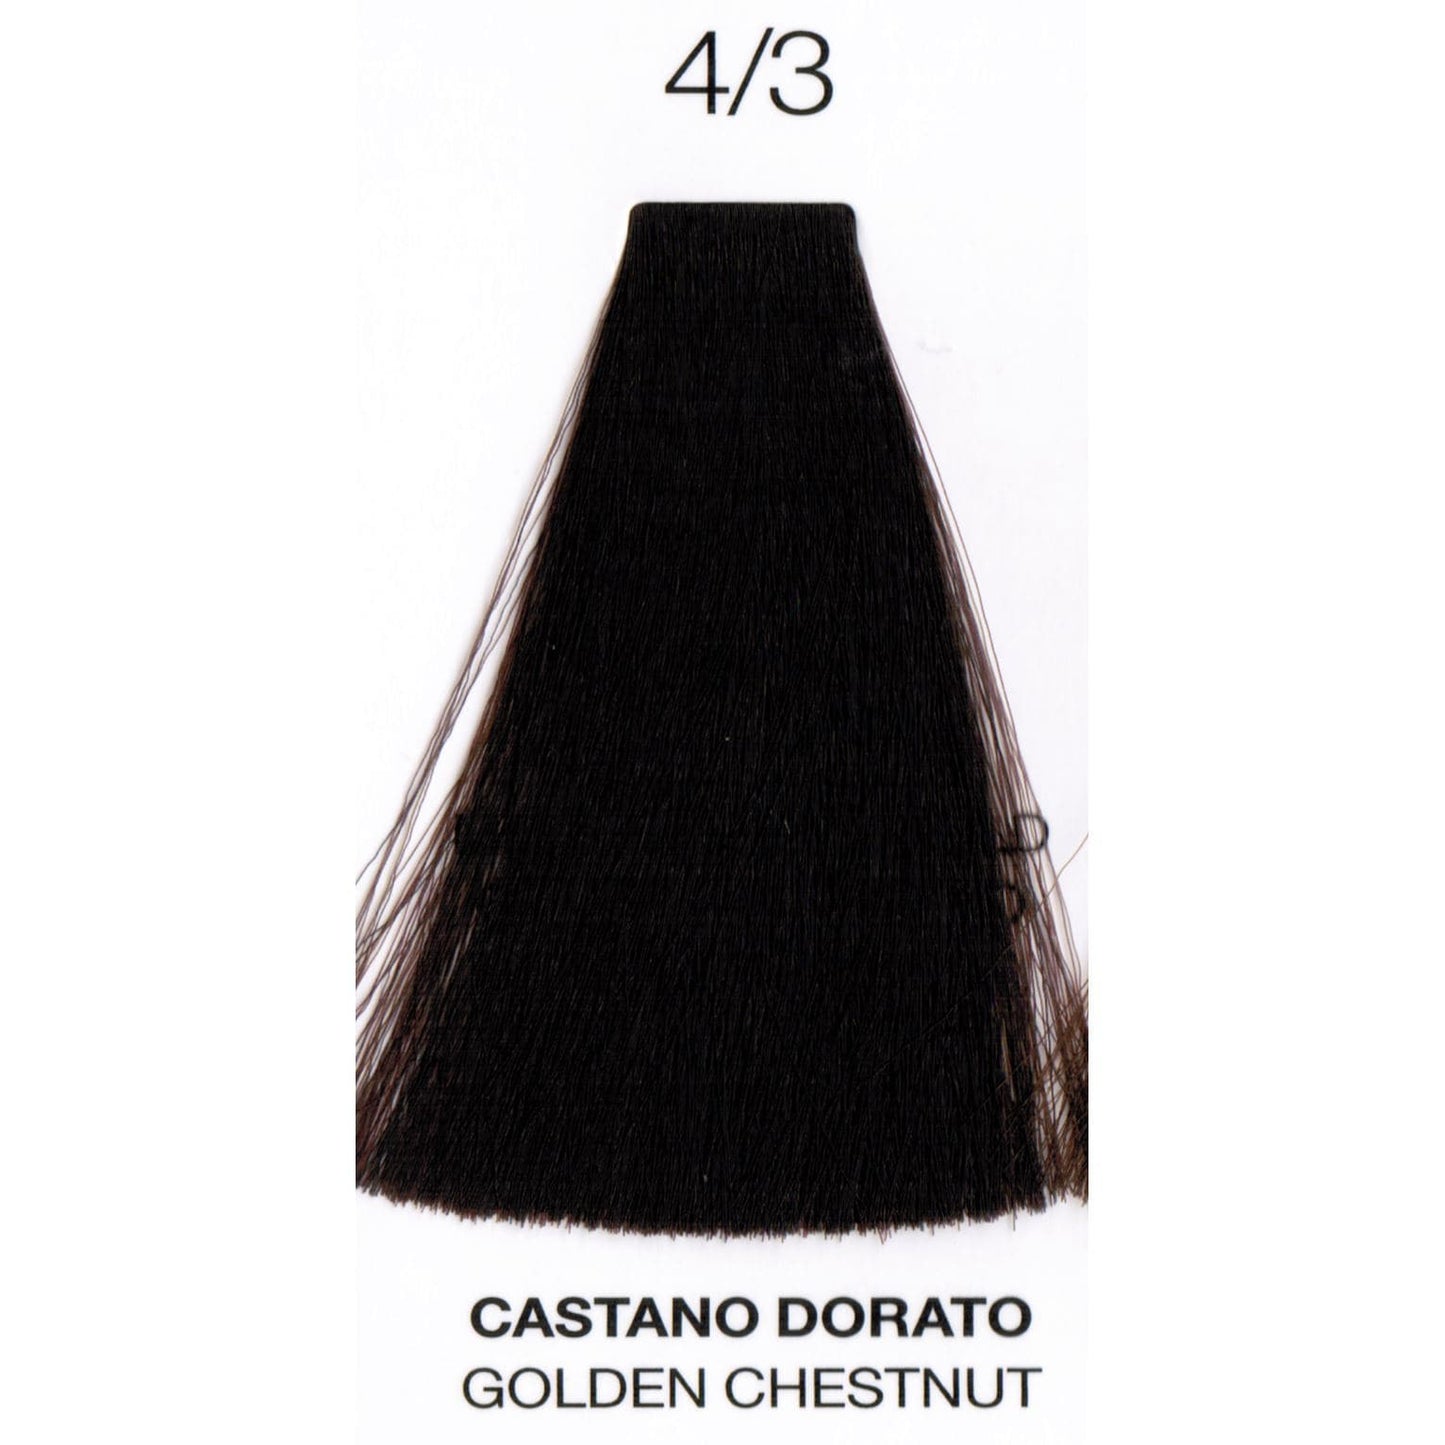 4/3 Golden Chestnut | Purity | Ammonia-Free Permanent Hair Color HAIR COLOR OYSTER 